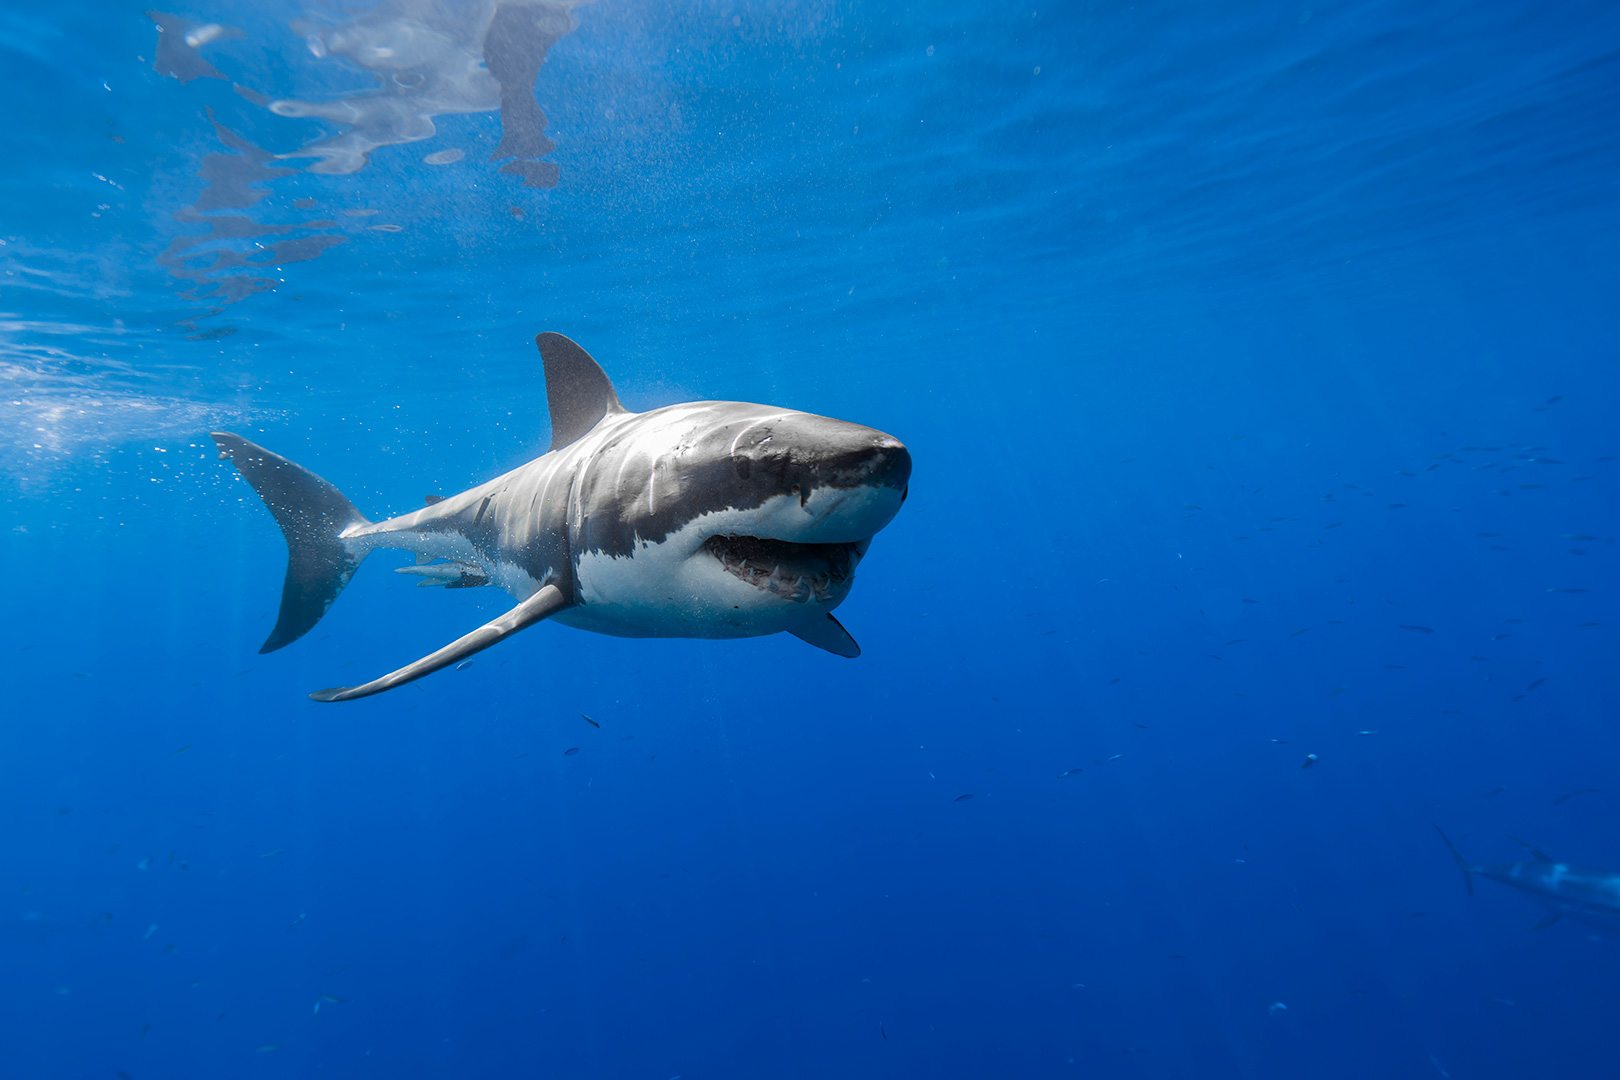 Image of a smiling great white shark image